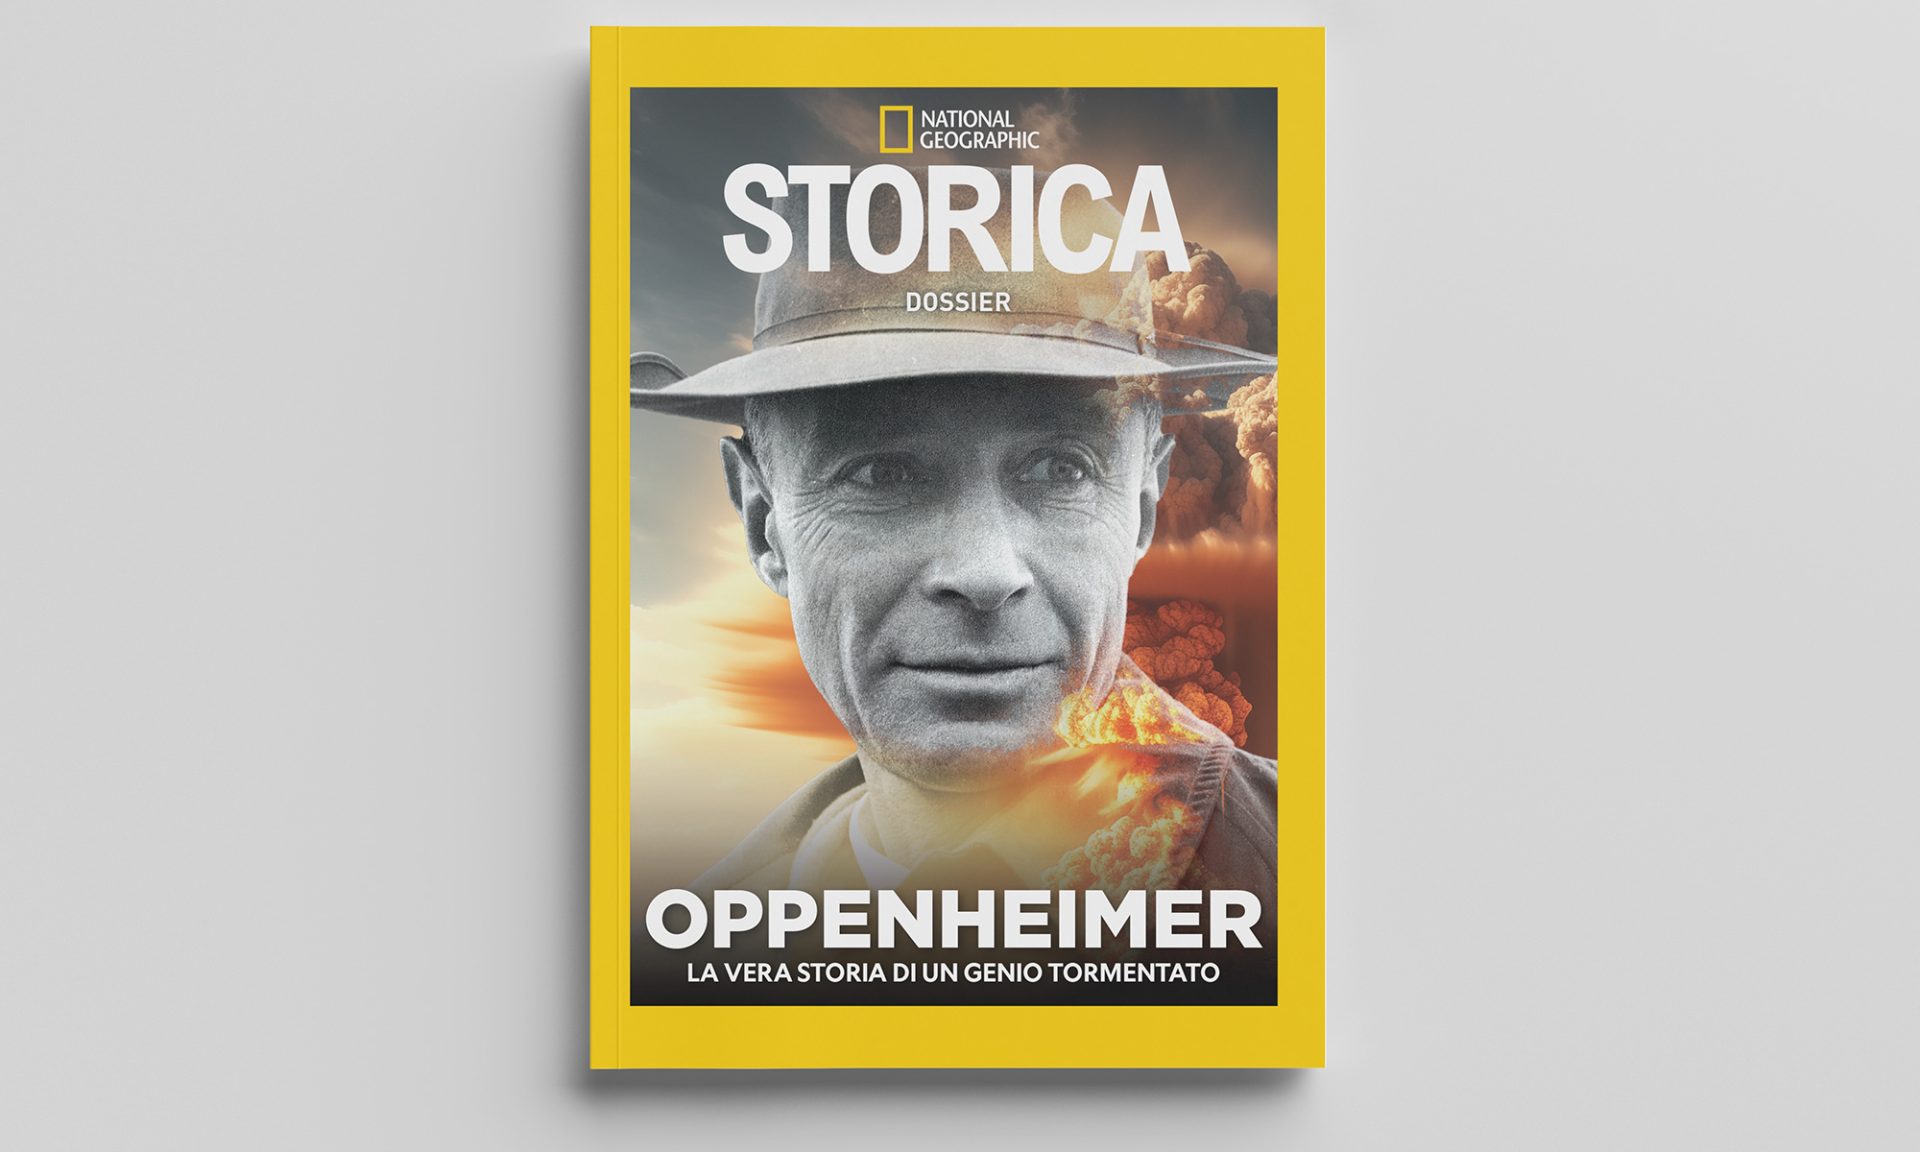 Oppenheimer – The true story of the tormented genius